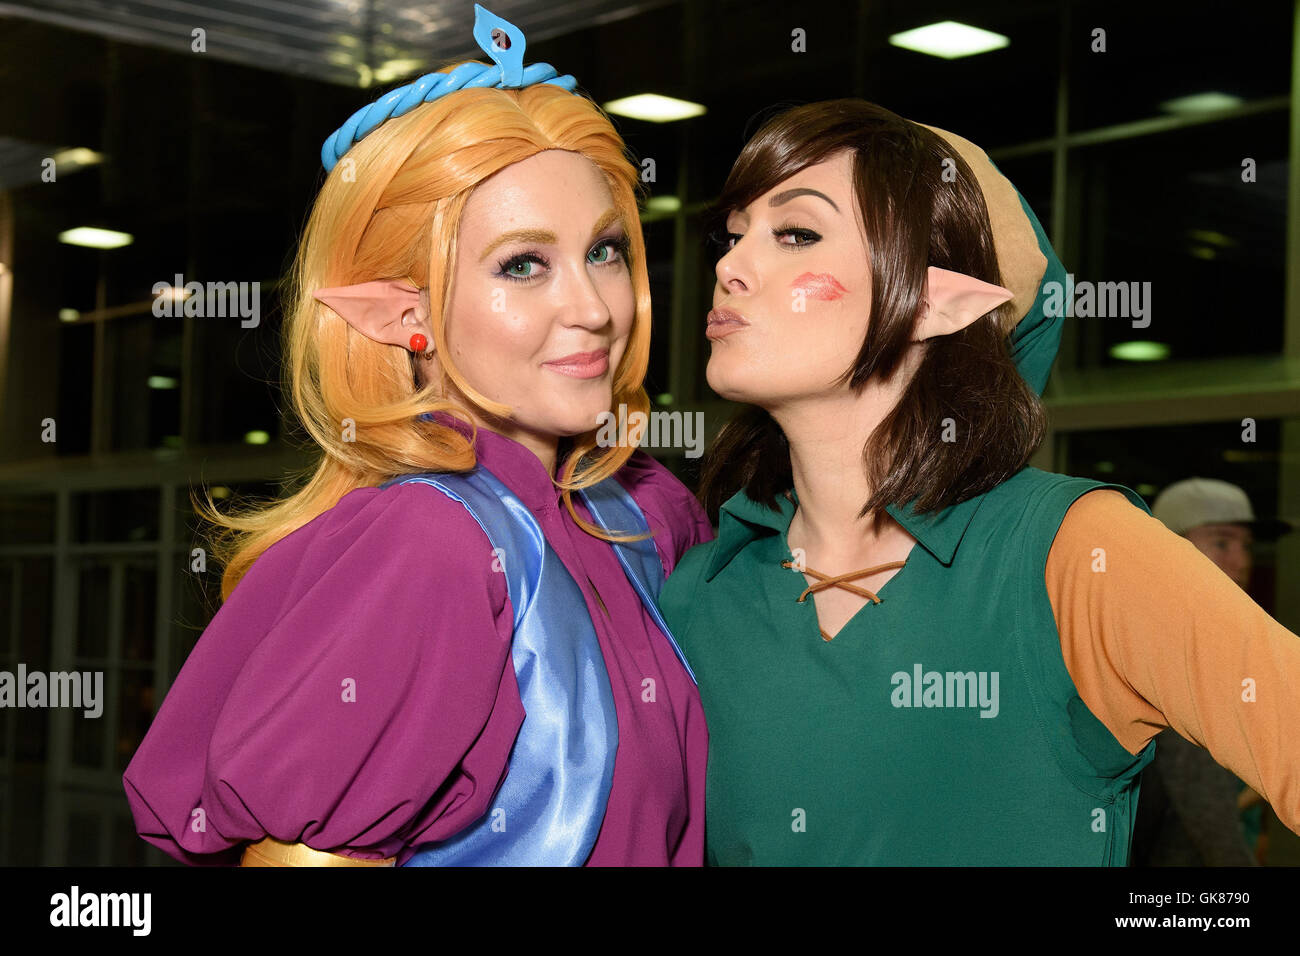 Chicago, Illinois, USA. 18th August 2016. Cosplayers dressed as The Legend of Zelda characters attend the Wizard World Chicago Comic Con at Donald E. Stephens Convention Center in Rosemont, IL. Credit:  Daniel Boczarski/Alamy Live News Stock Photo